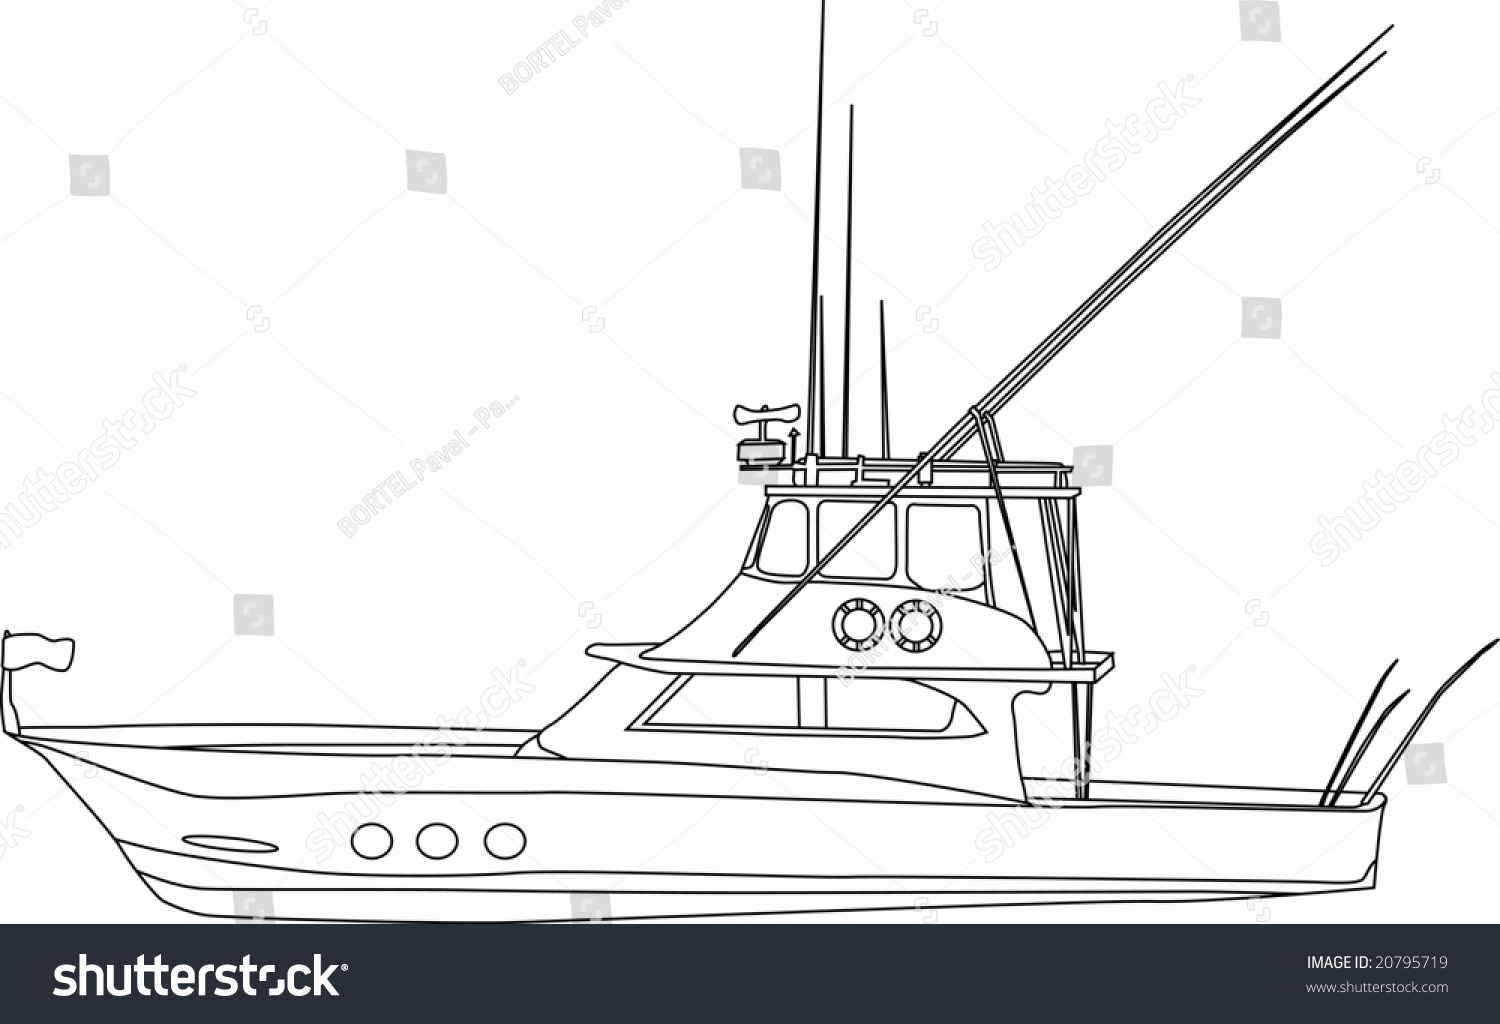 Download Vector Contour Fishing Boat Isolated On Stock Vector 20795719 - Shutterstock